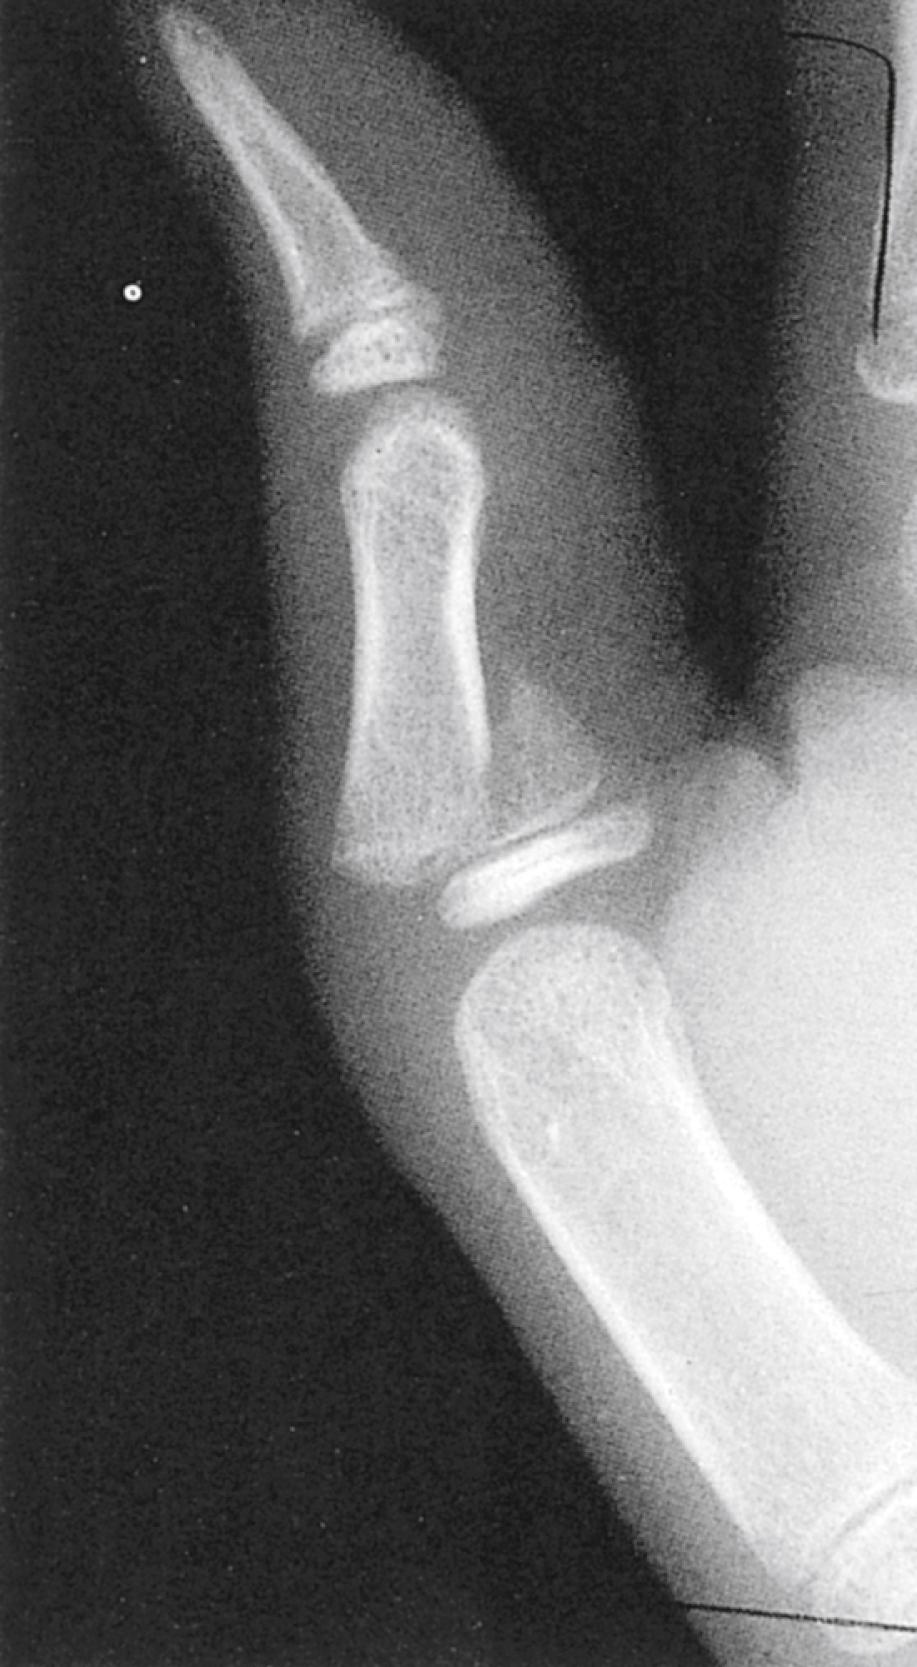 Fig. 22.39, Salter-Harris type II injury. On this lateral radiograph of the thumb, the fracture is seen to involve the proximal phalanx. The fracture line runs through the physis and exits through the metaphysis on the side opposite the site of fracture initiation. A fragment consisting of the entire epiphysis with the attached metaphyseal fragment is produced.